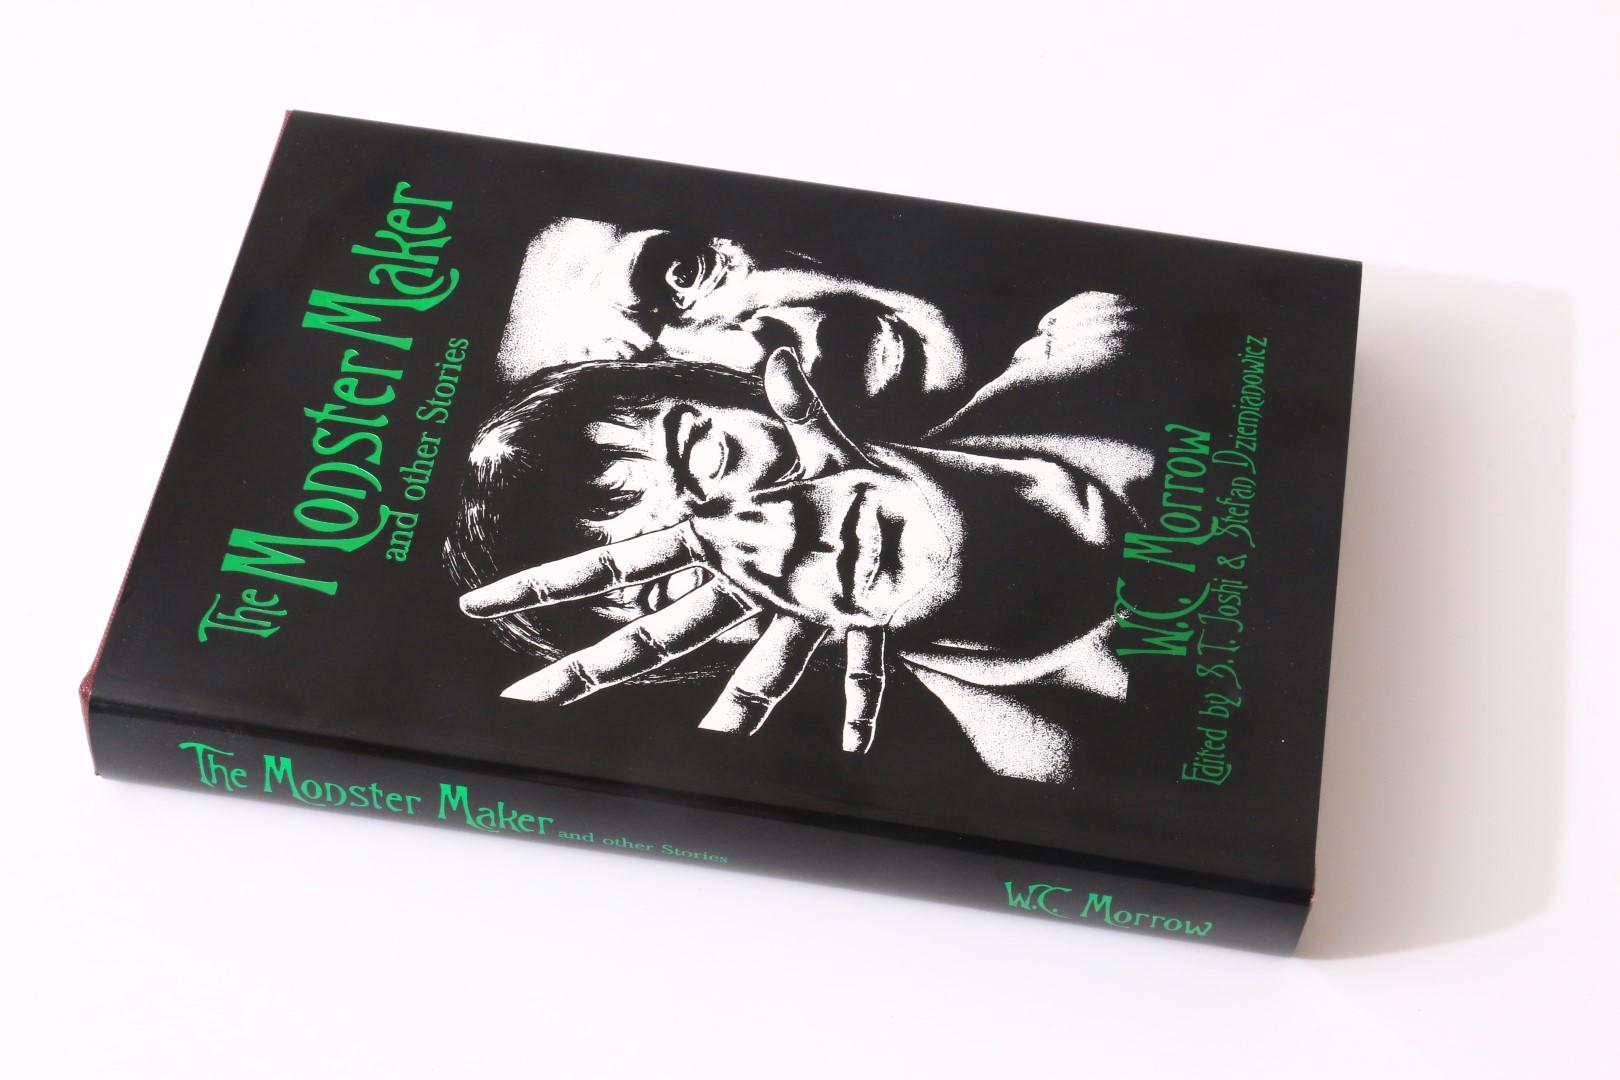 W.C. Morrow - The Monster Maker and Other Stories - Midnight House, 2000, First Edition.